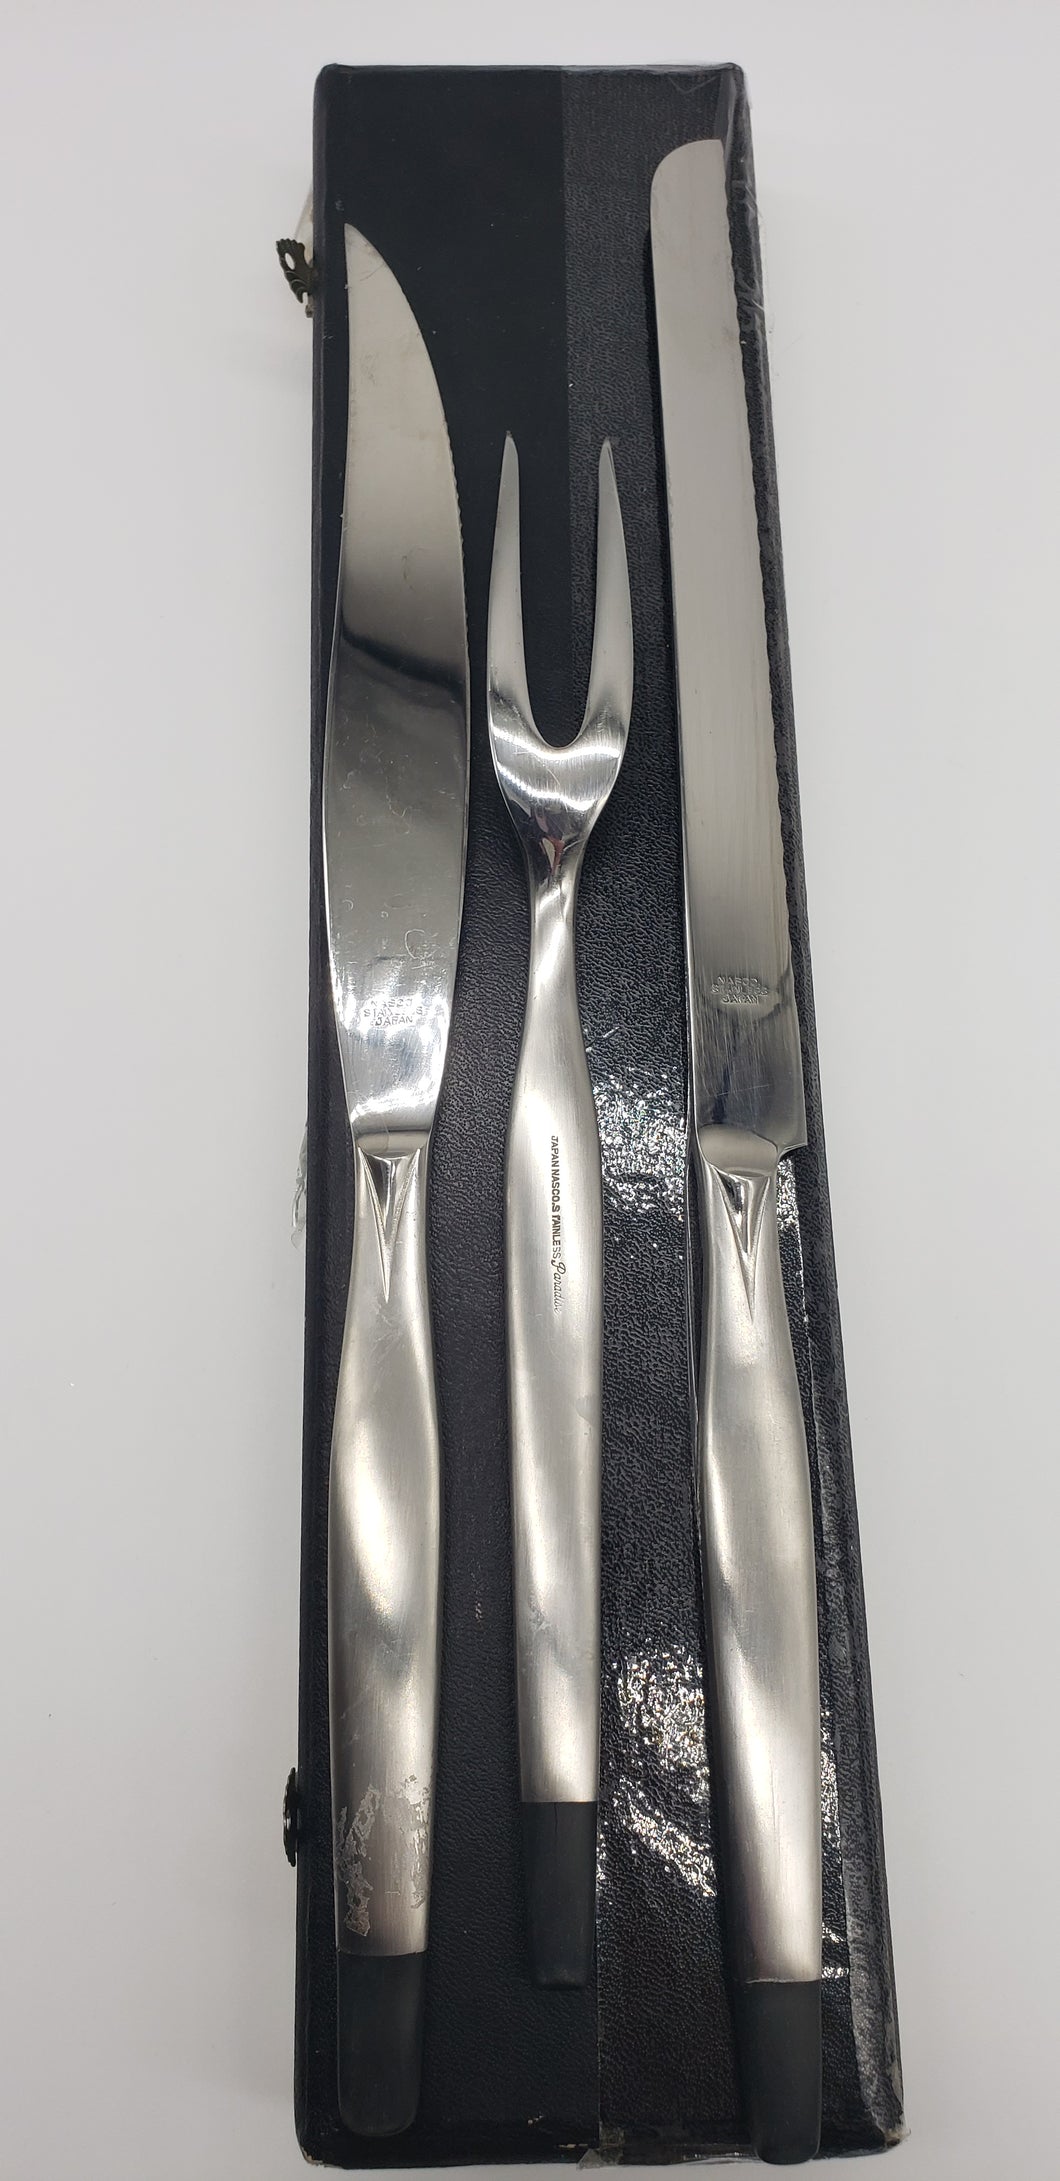 Paradise Nasco Stainless Japan Meat Bread Black Tip Brushed Steel 2 Knives & 1 Fork with case